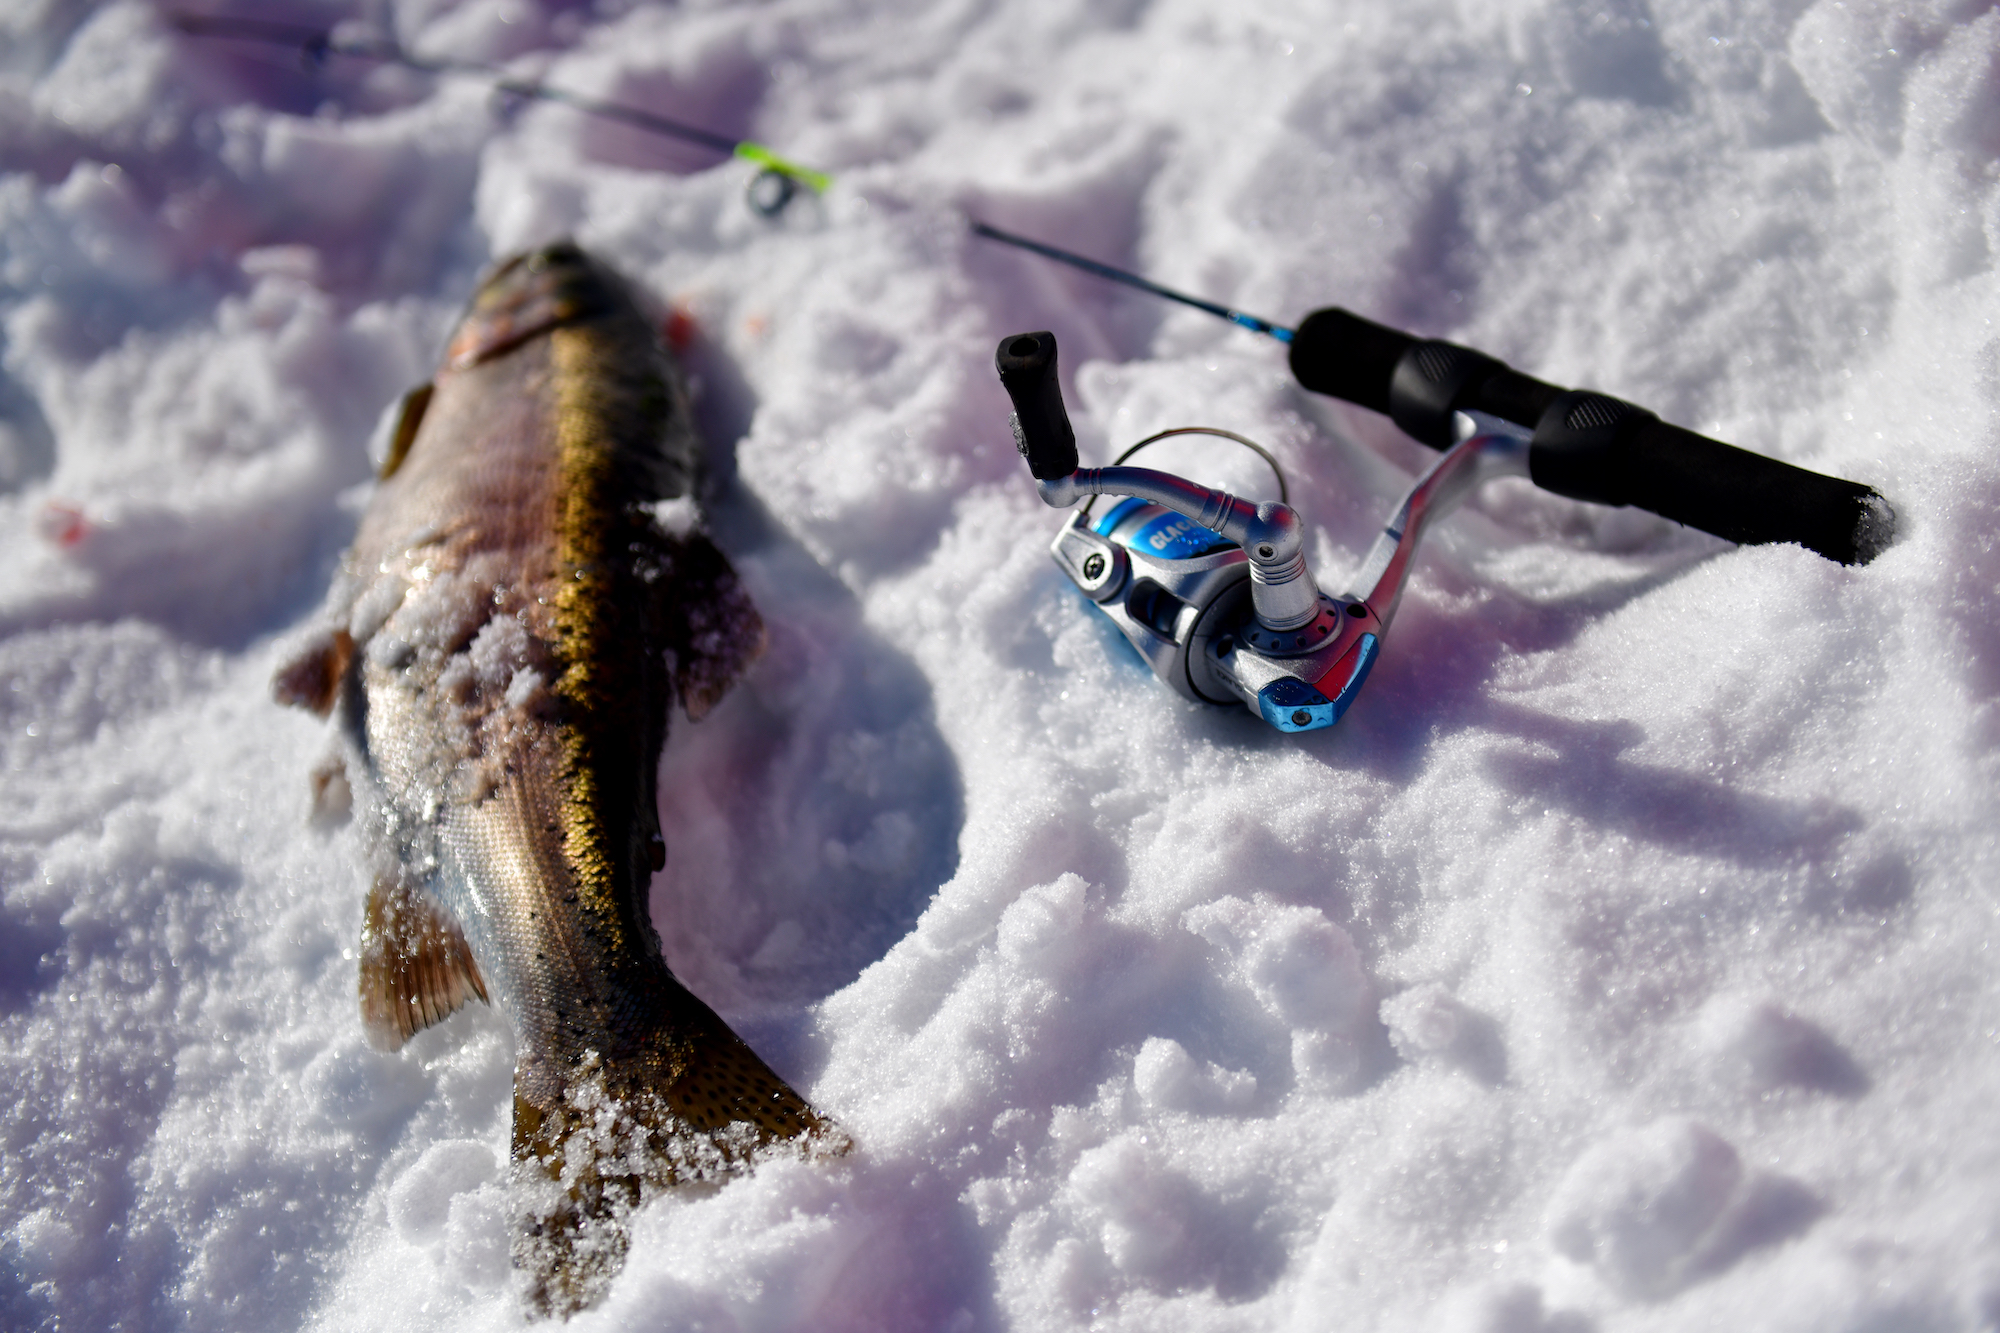 Places To Go Ice Fishing